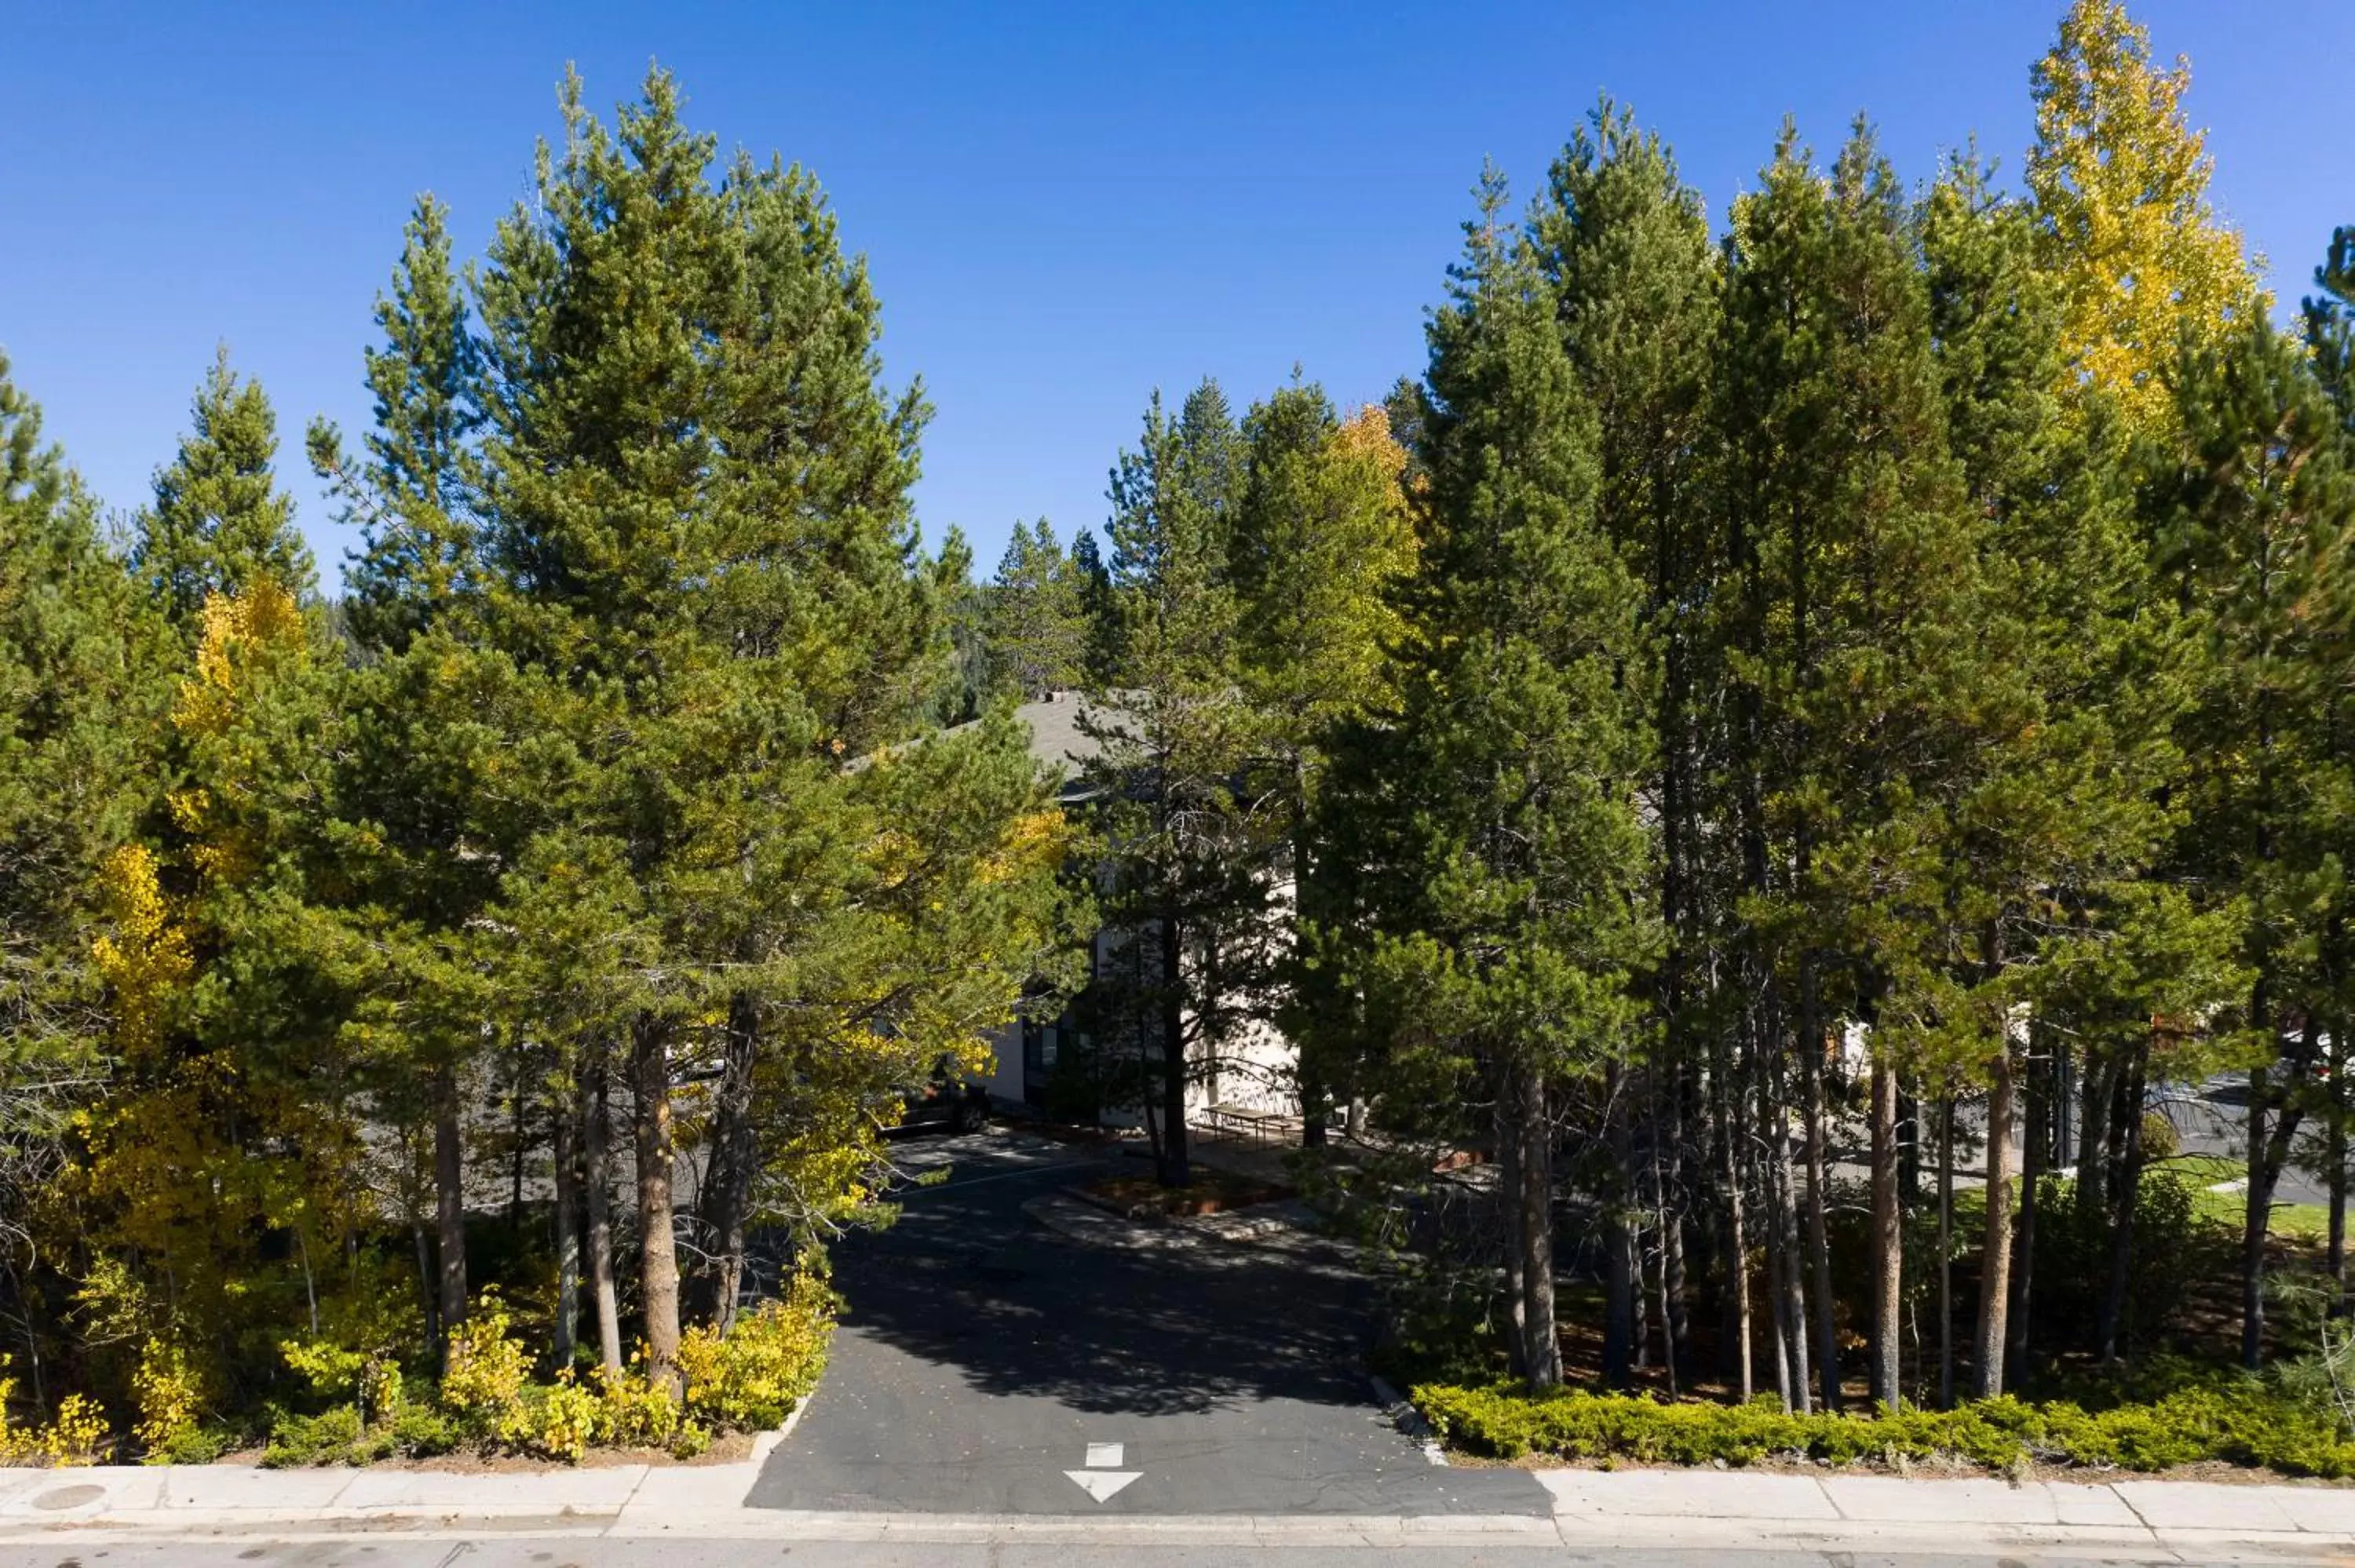 Property building in Inn At Truckee